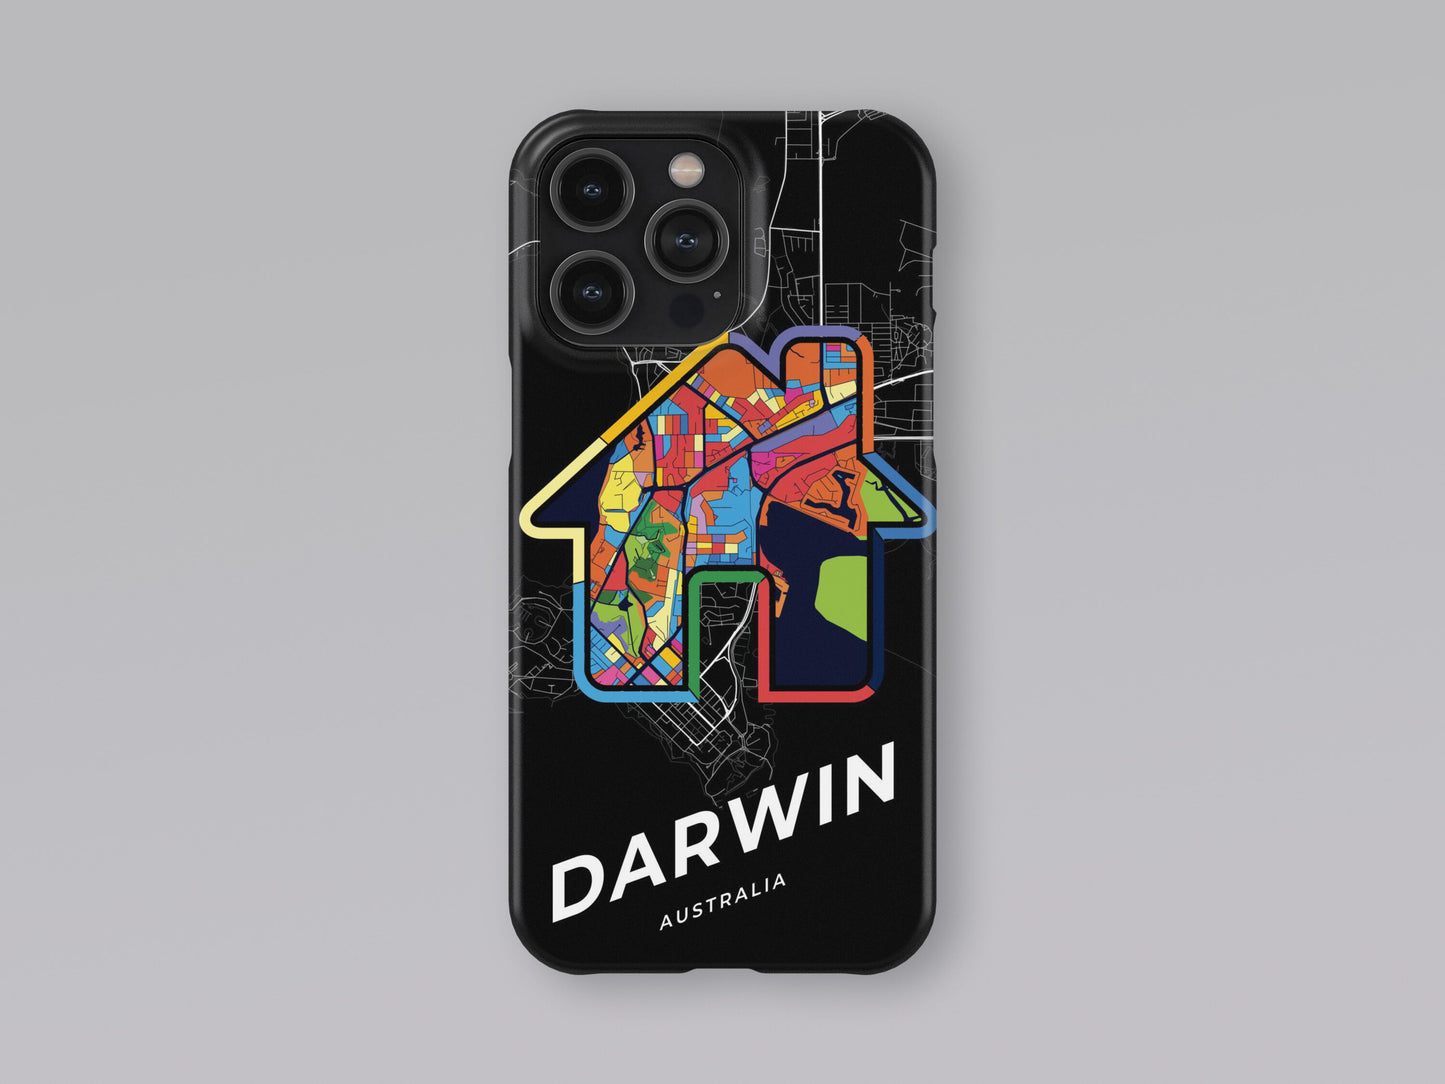 Darwin Australia slim phone case with colorful icon. Birthday, wedding or housewarming gift. Couple match cases. 3